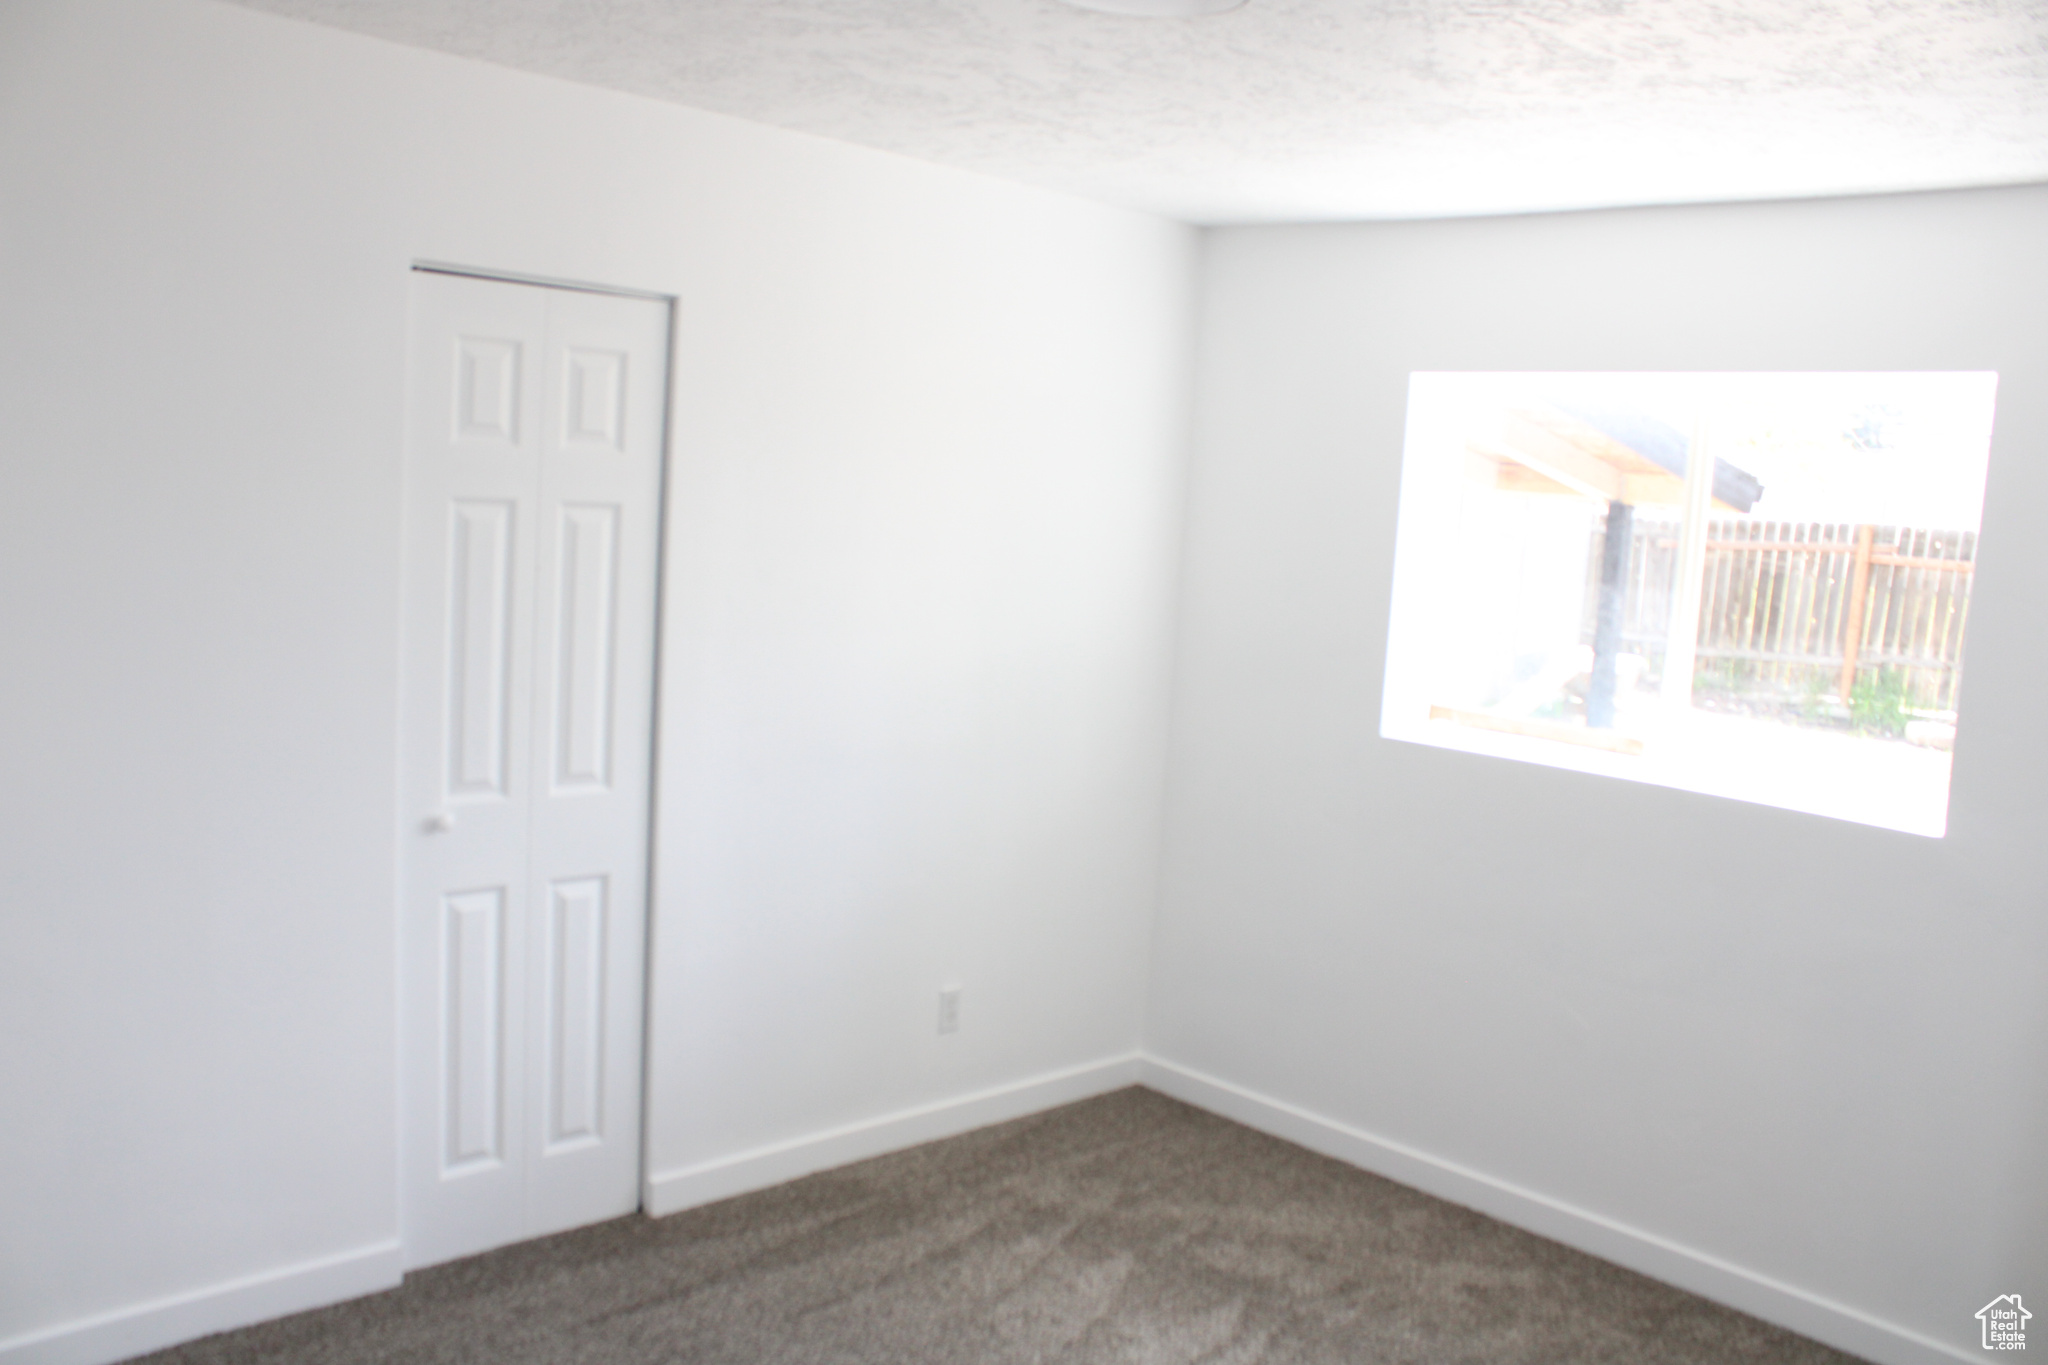 Unfurnished room with a textured ceiling and dark carpet